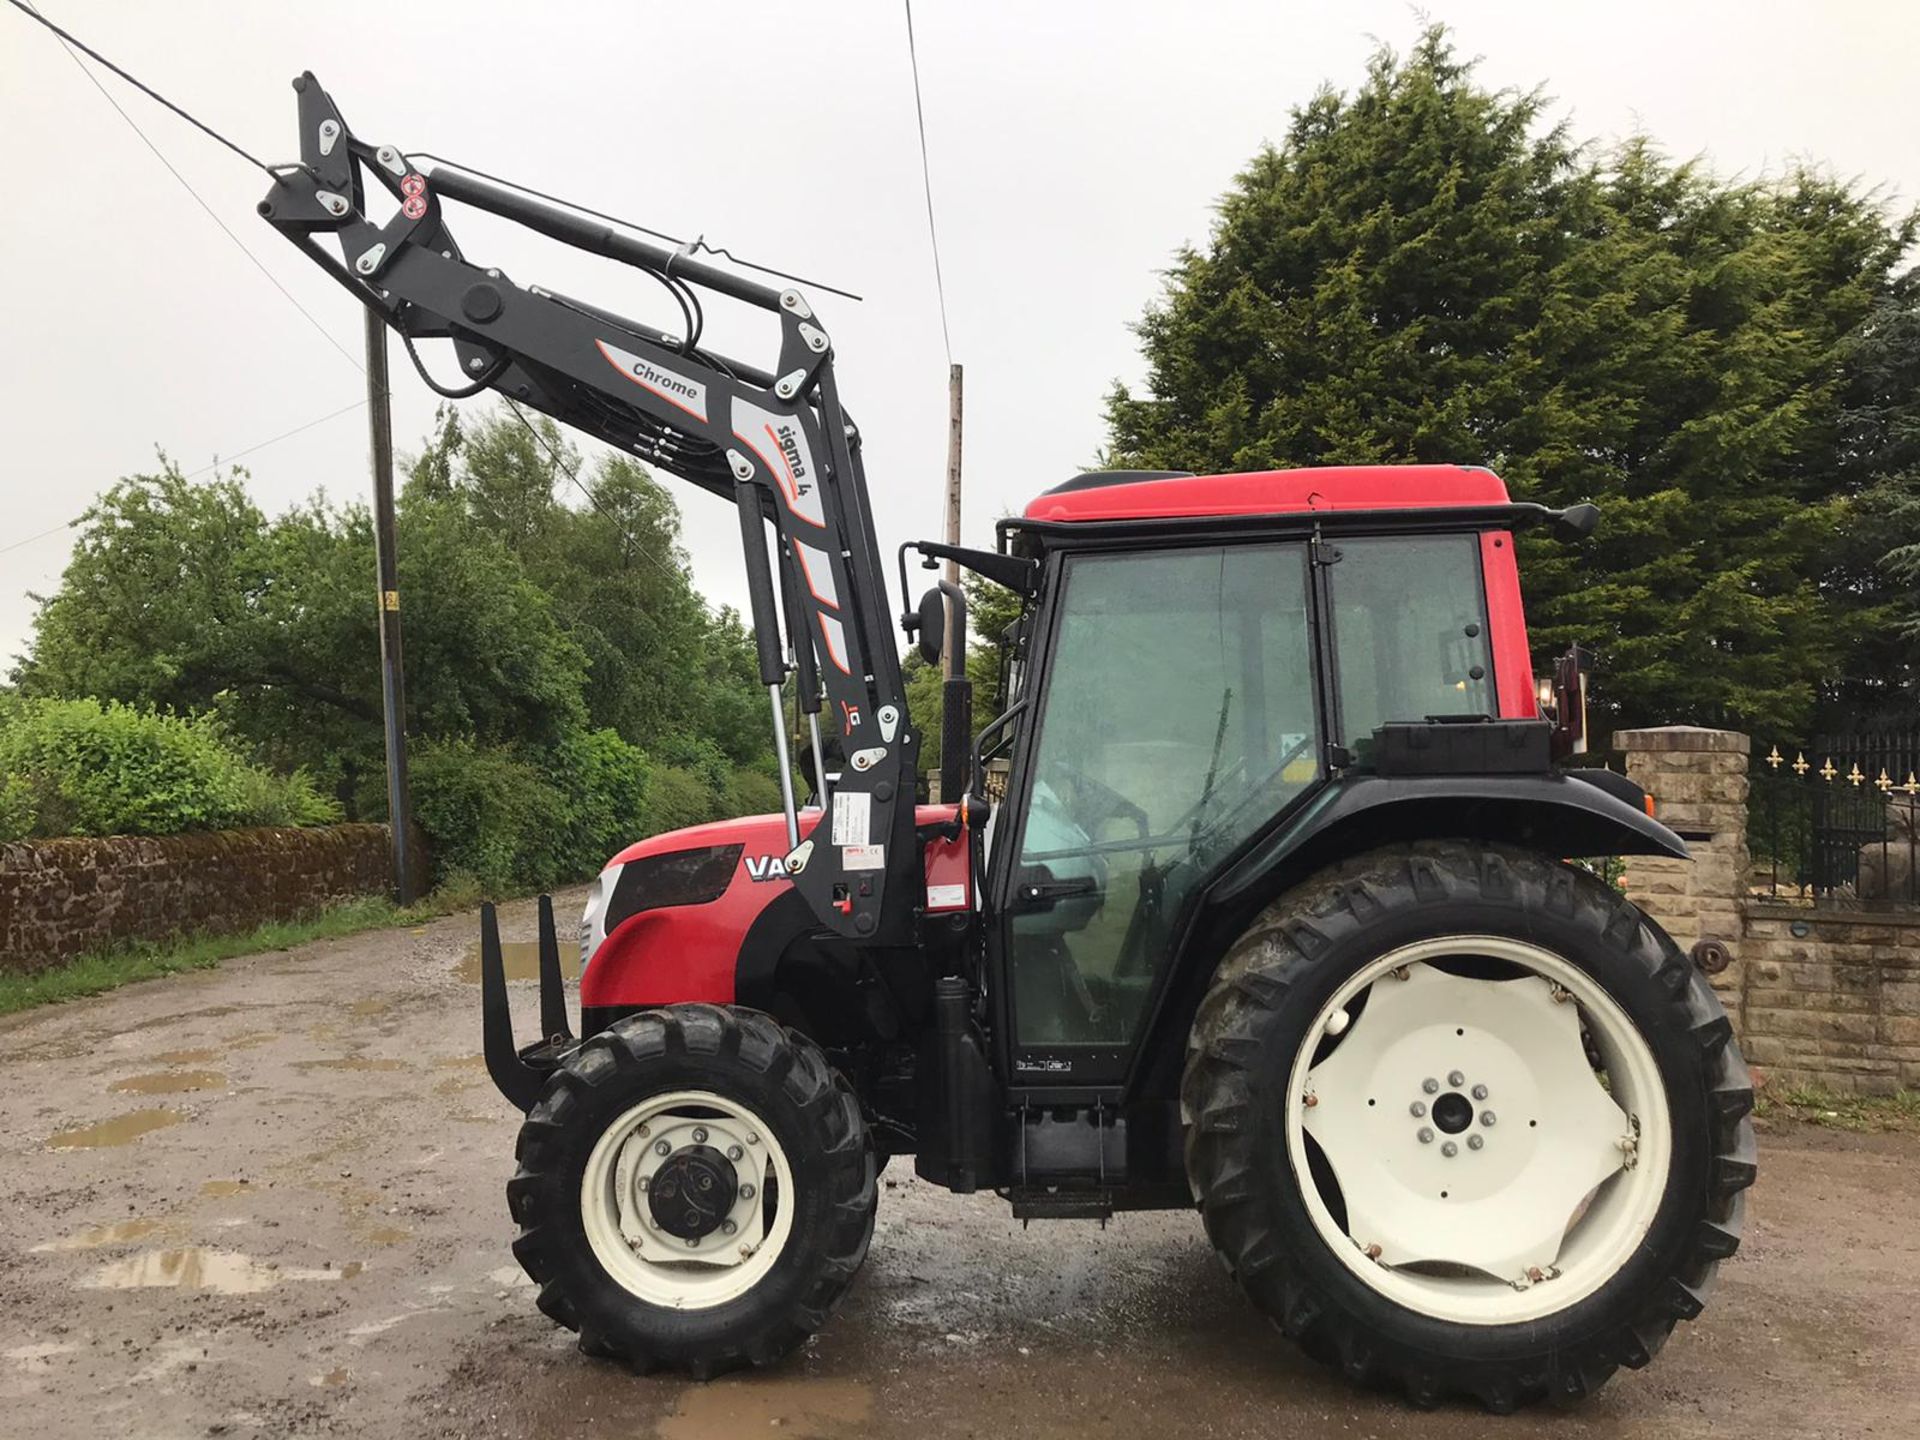 2017/67 REG VALTRA A73 TRACTOR WITH LOADER, RUNS, DRIVES AND LIFTS, SHOWING 550 HOURS *PLUS VAT* - Image 4 of 5